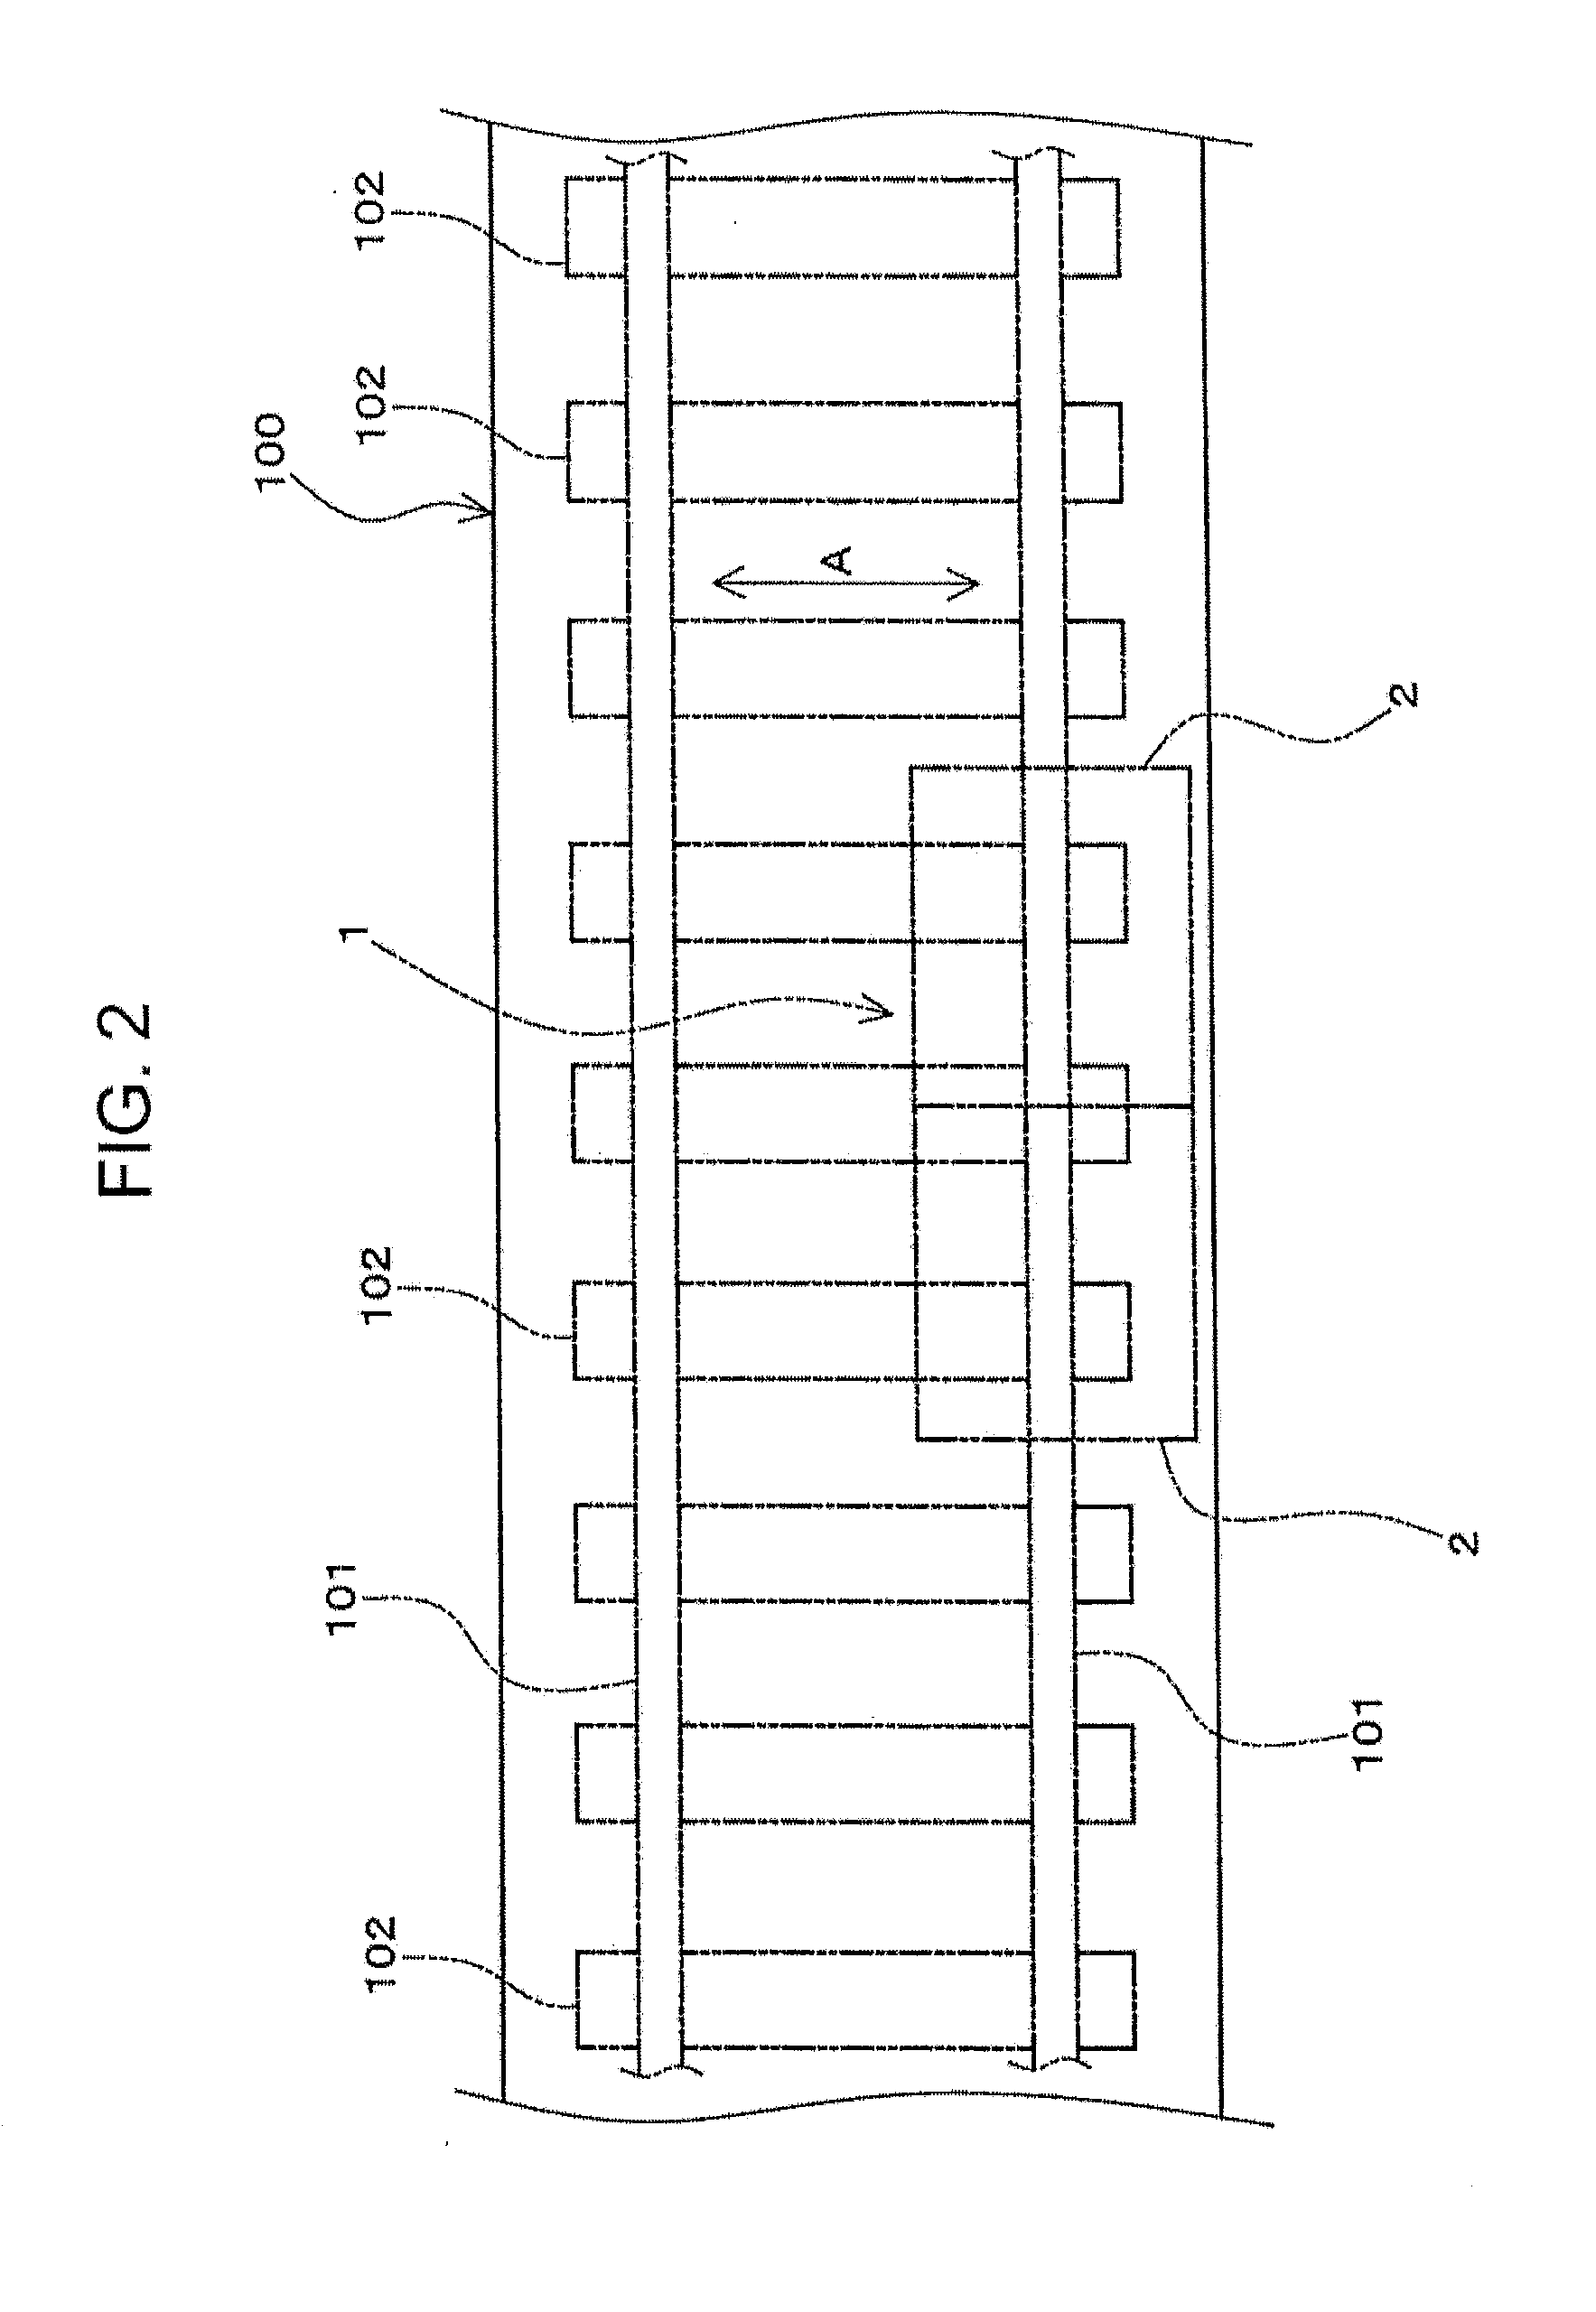 Air compressor unit for vehicle